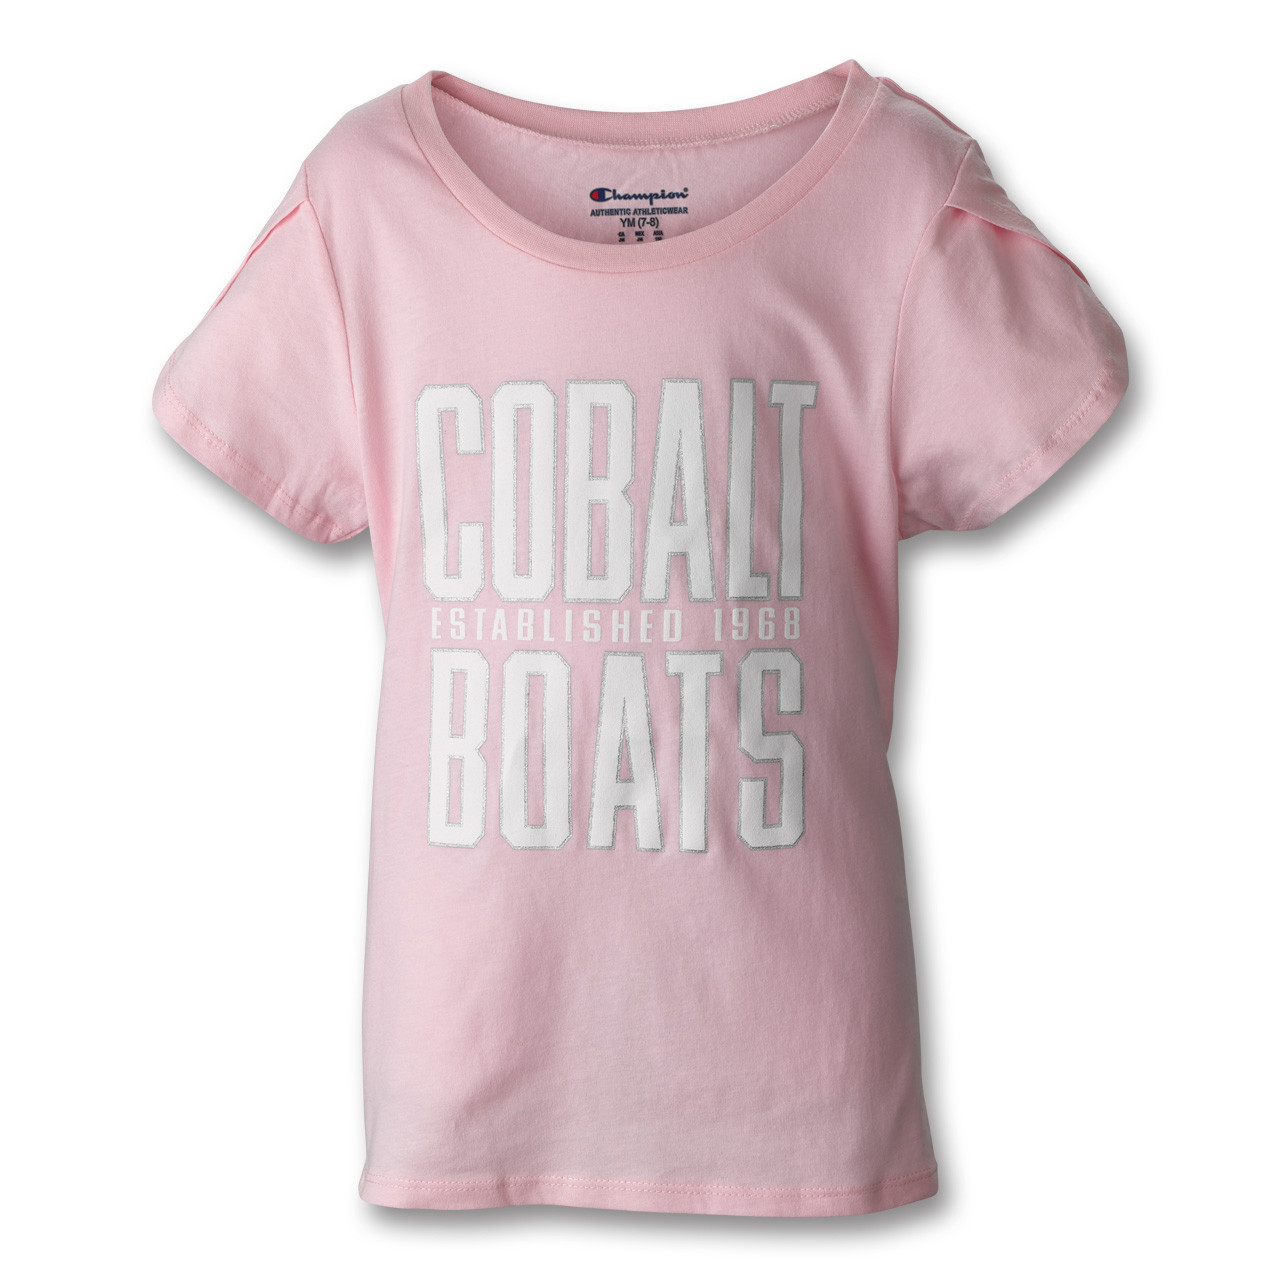 Y207 Youth Champion Girly Tee - Cobalt 